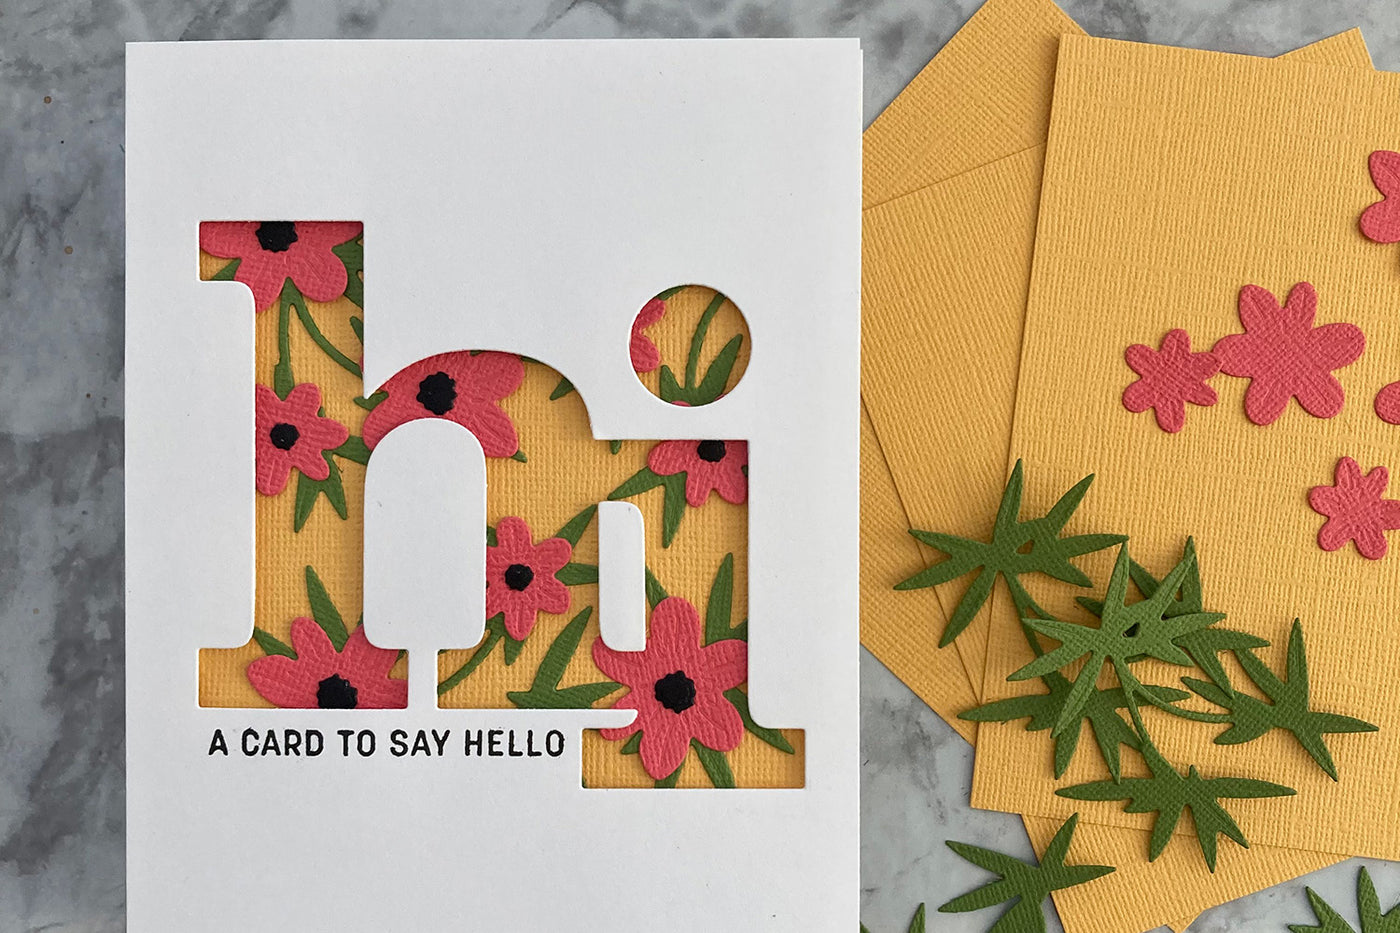 Ideas For Using Large Letter Dies on Handmade Cards